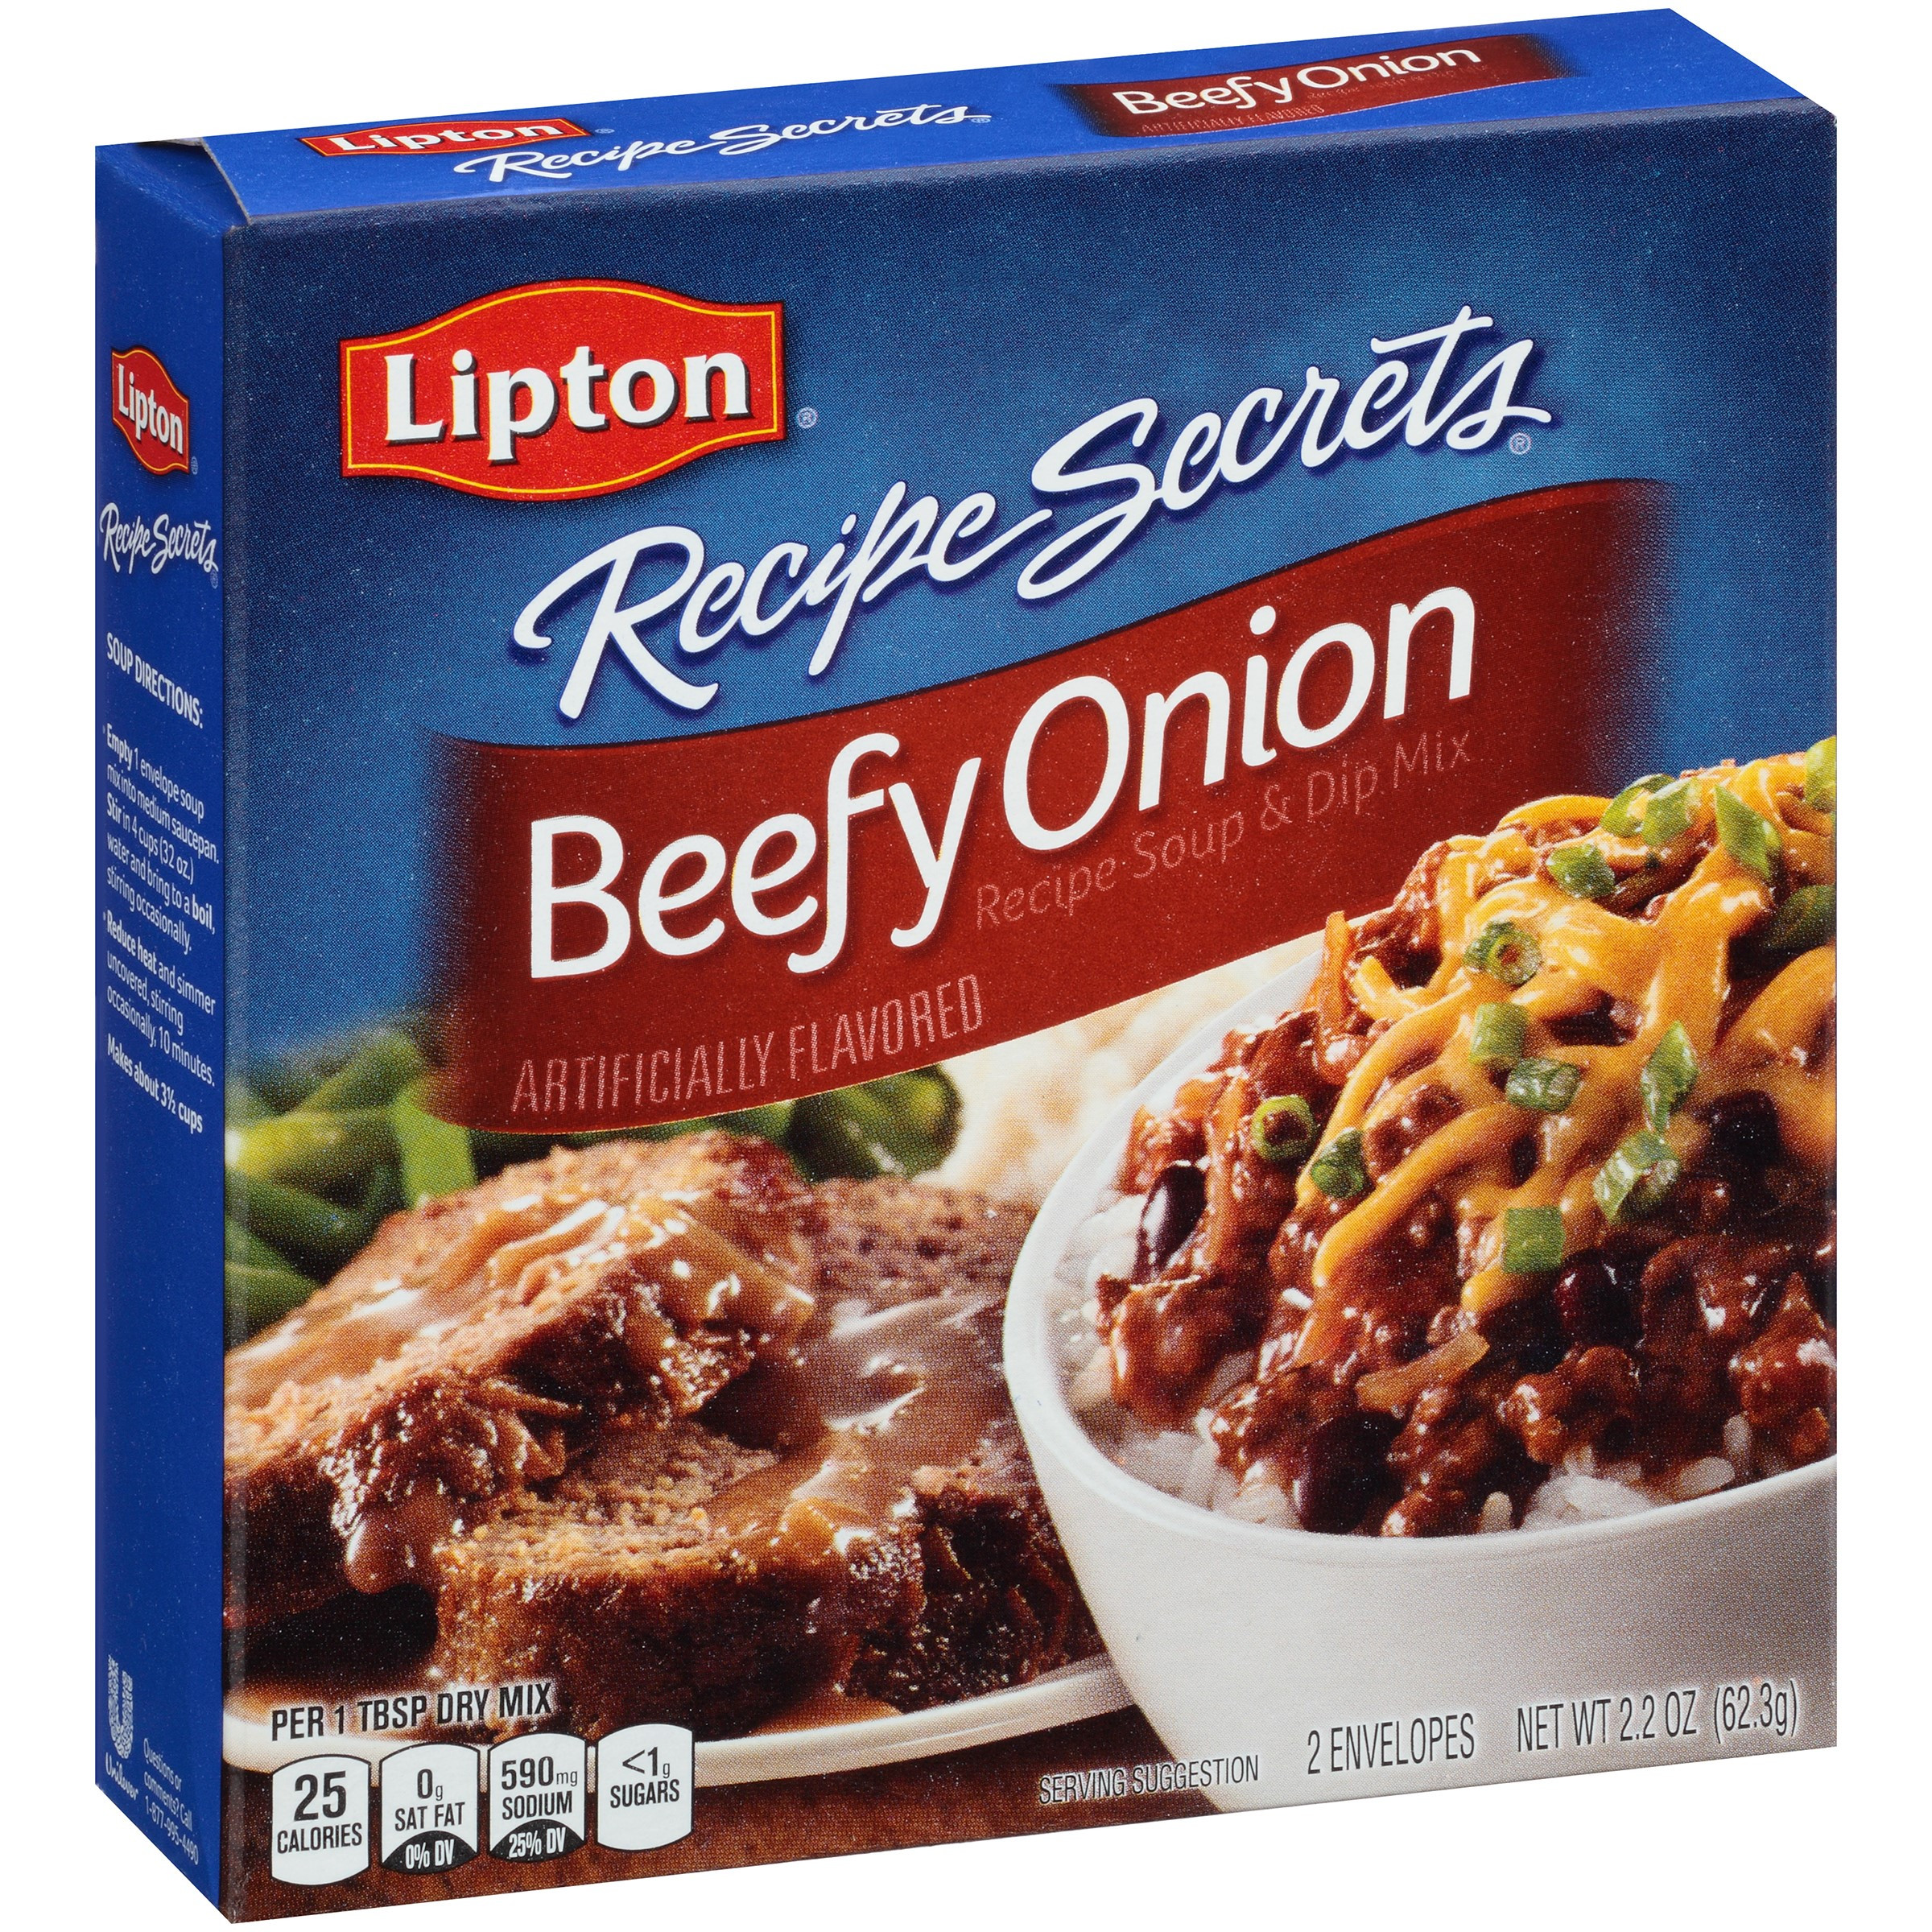 Lipton Onion Soup Mix Meatloaf
 Retro Recipe Souped up Meatloaf